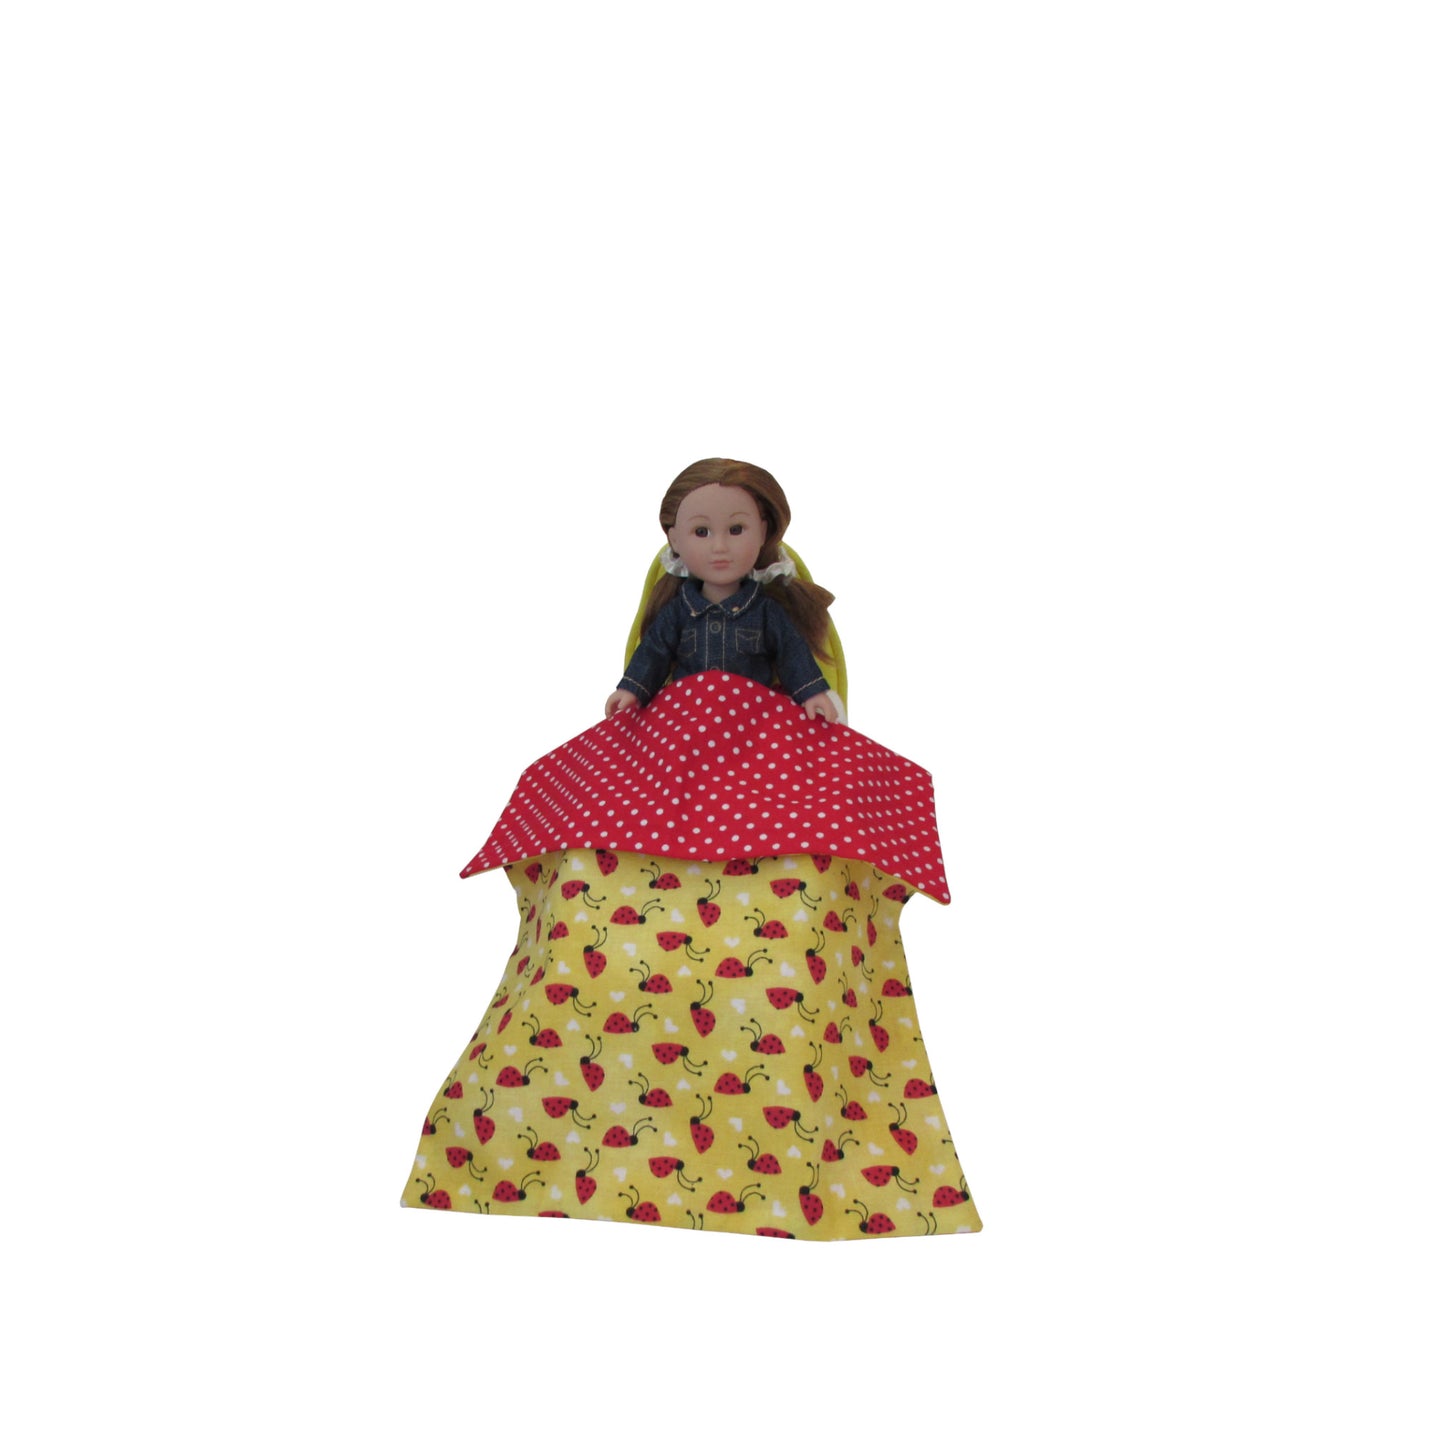 Bright Yellow Doll Bed and Reversible Ladybug Doll Bedding for 6.5-inch dolls with doll Second view